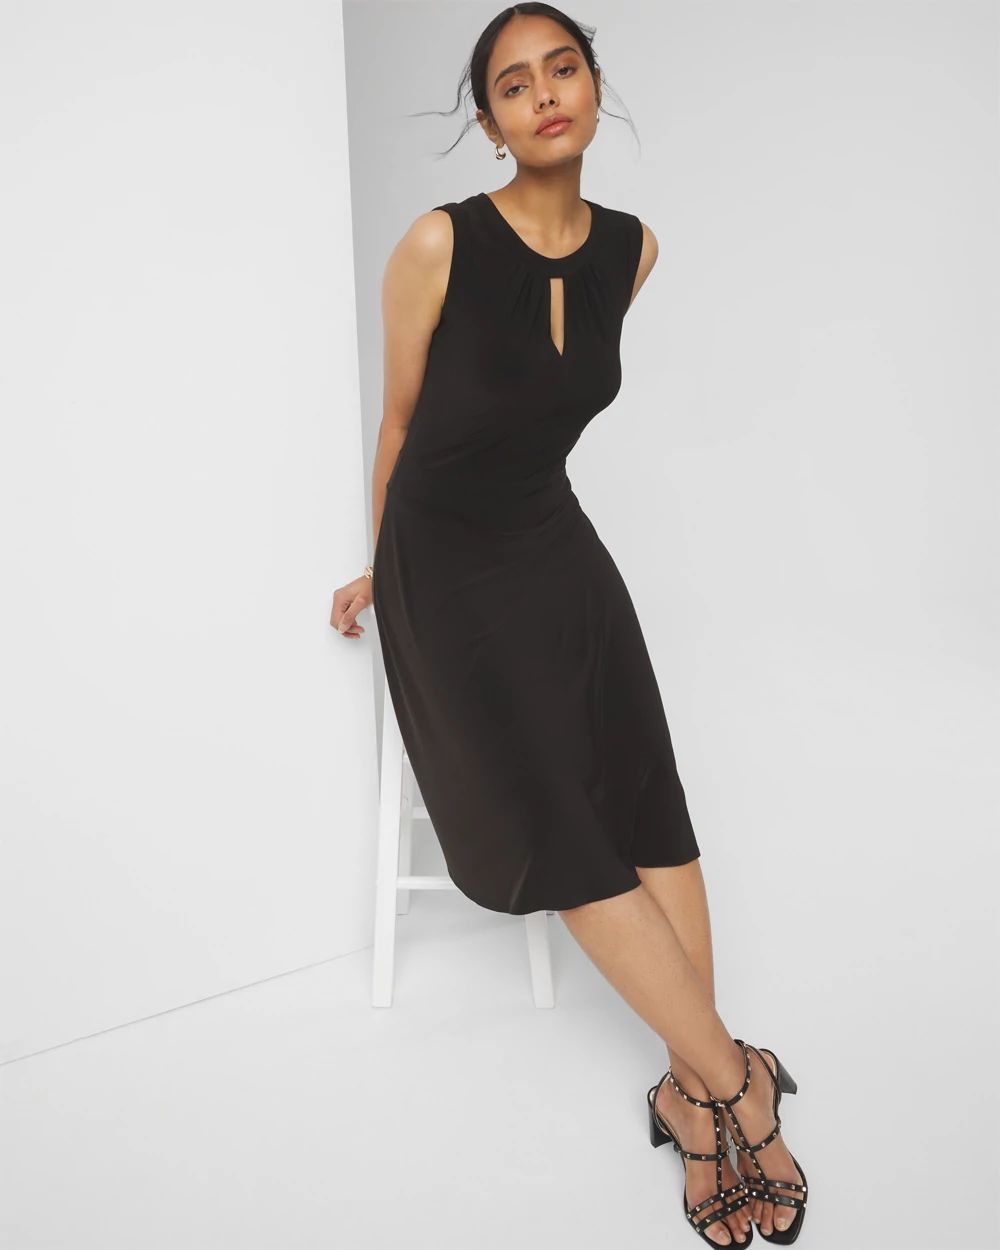 Matte Jersey Keyhole Dress click to view larger image.